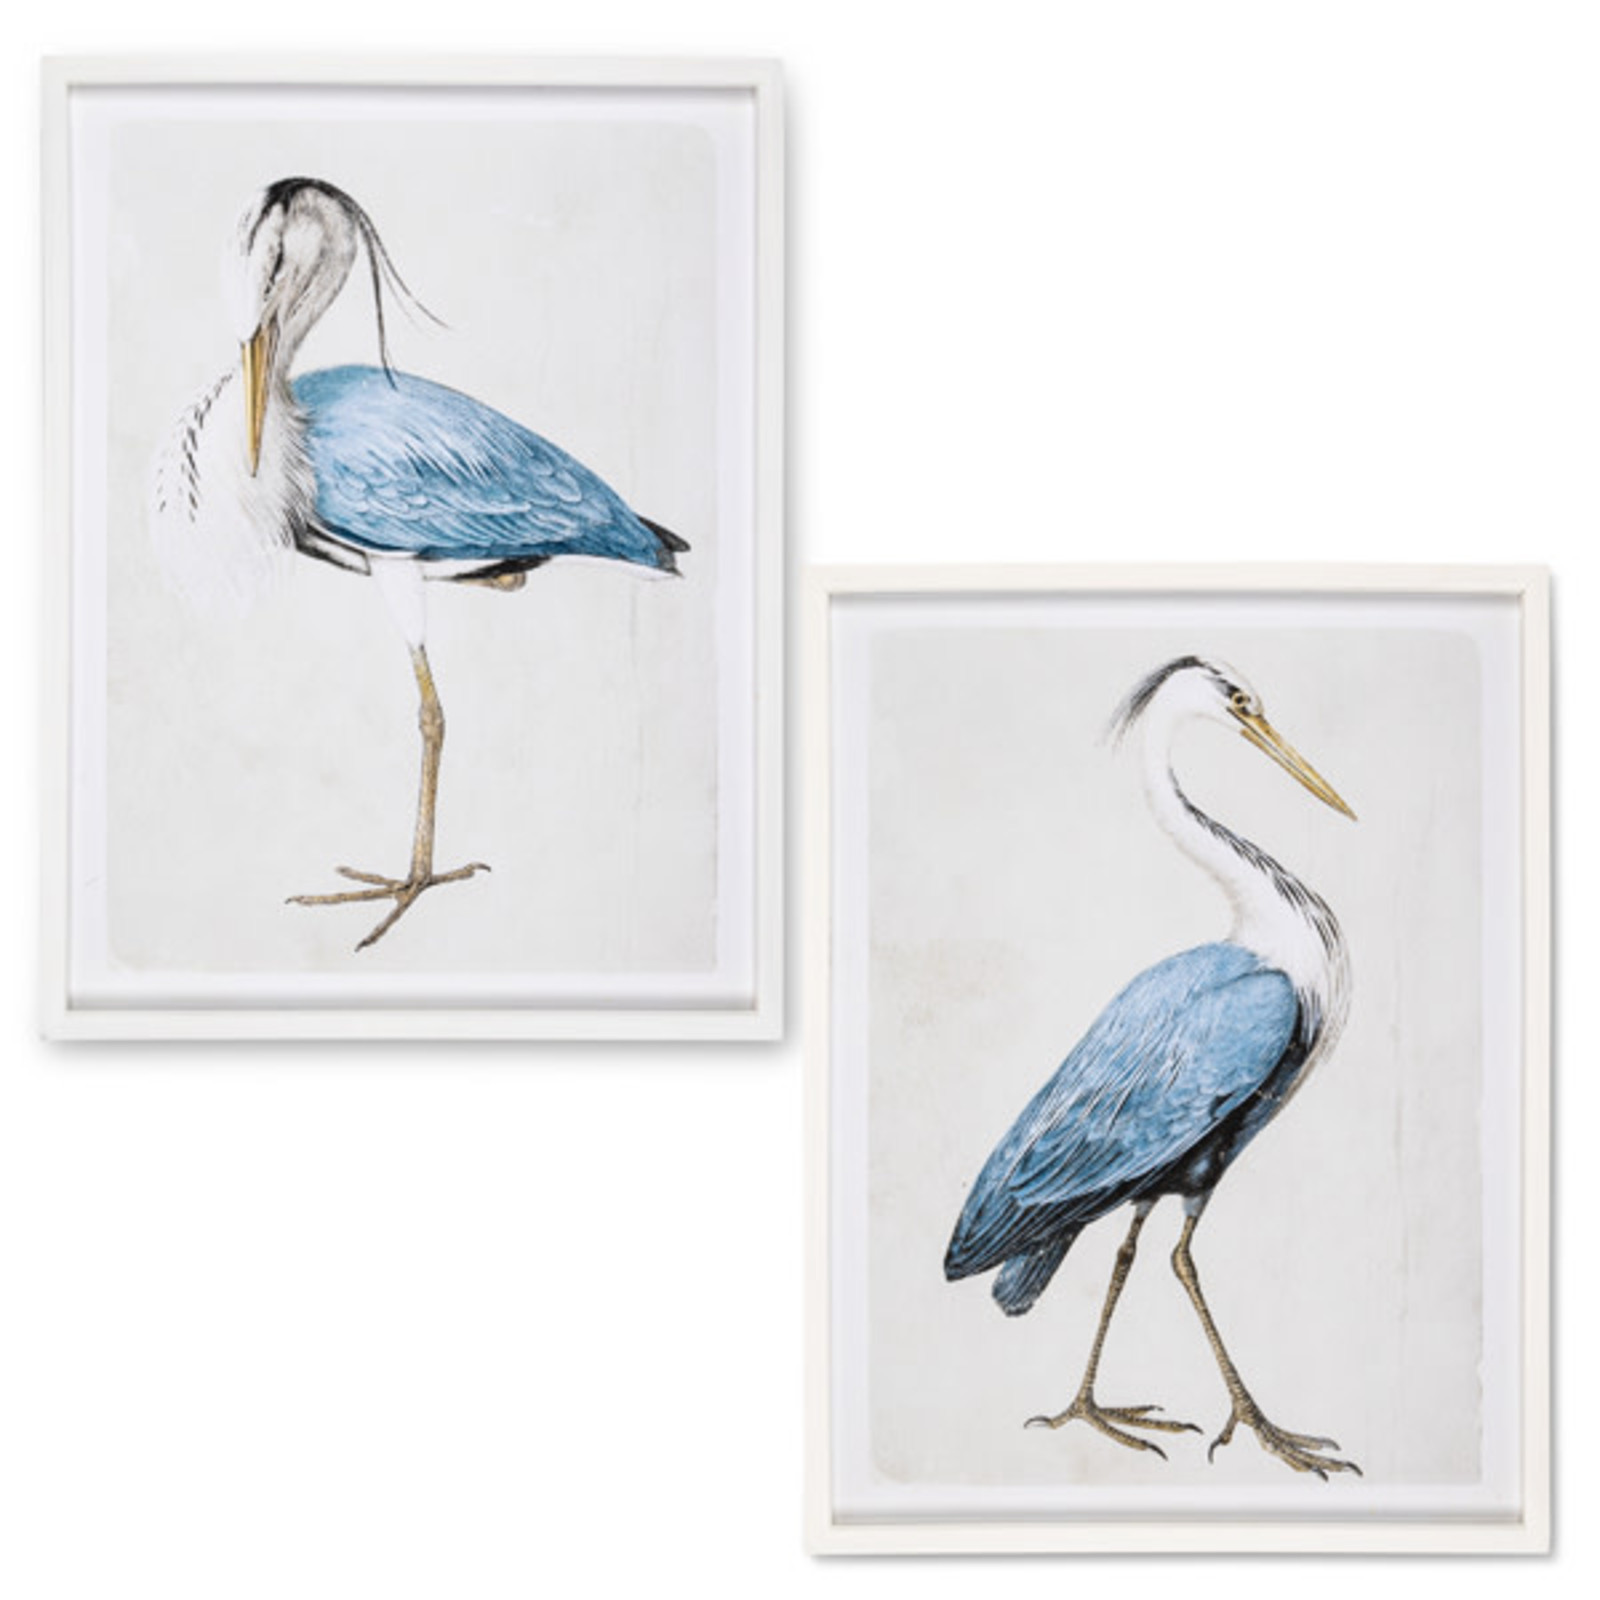 Gerson 23.62"W x 31.5"H  Set of 2  Blue And White Heron Wall Art  95860 loading=